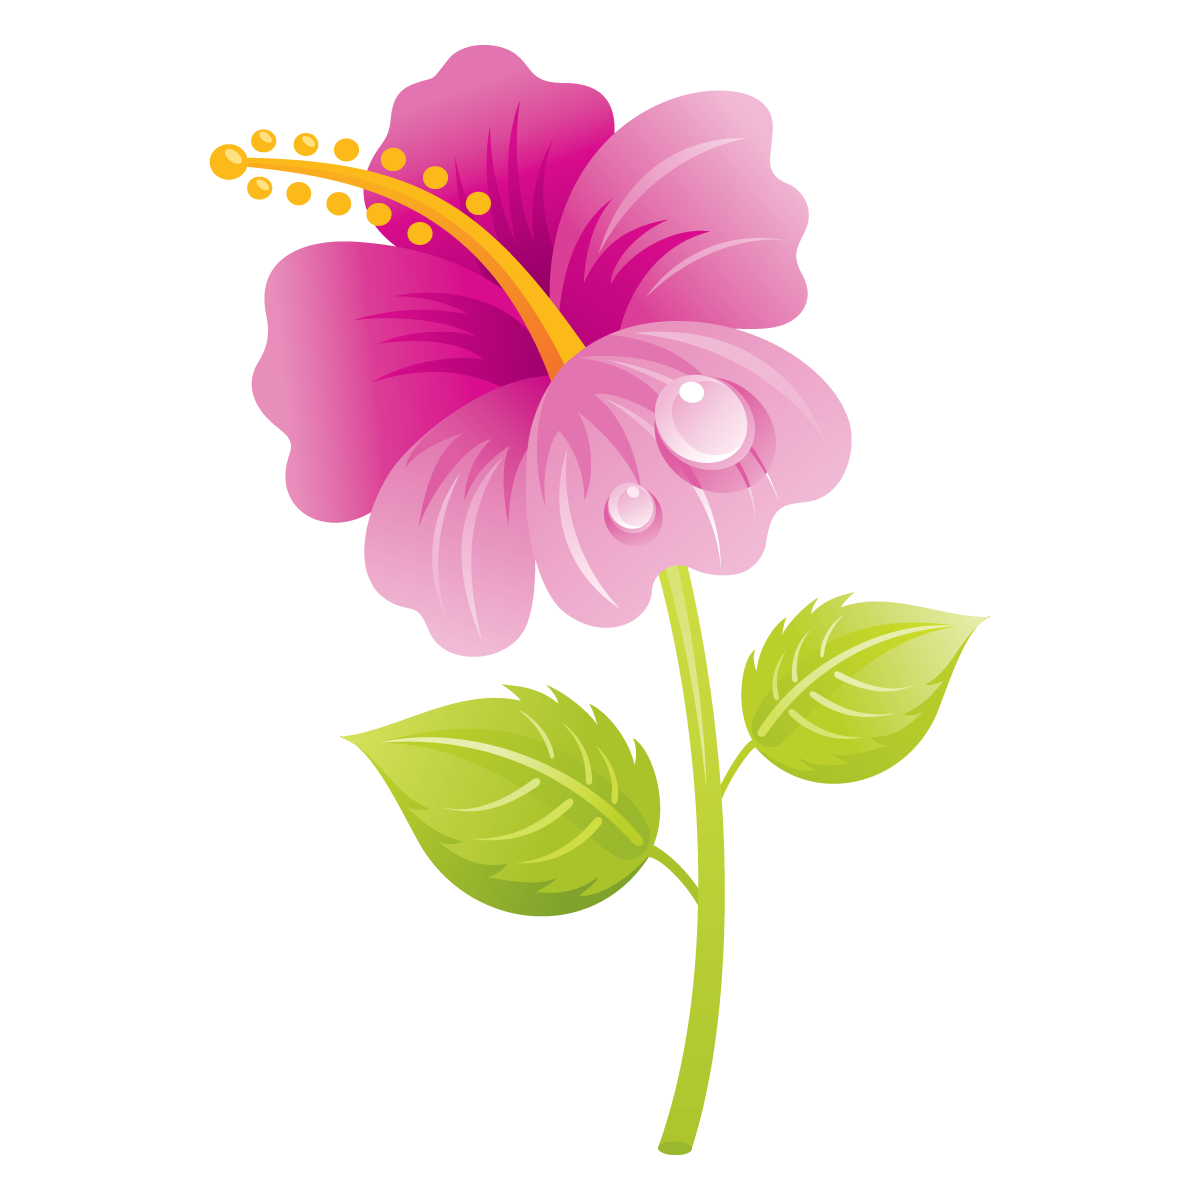 flowers clipart - Free Large Images